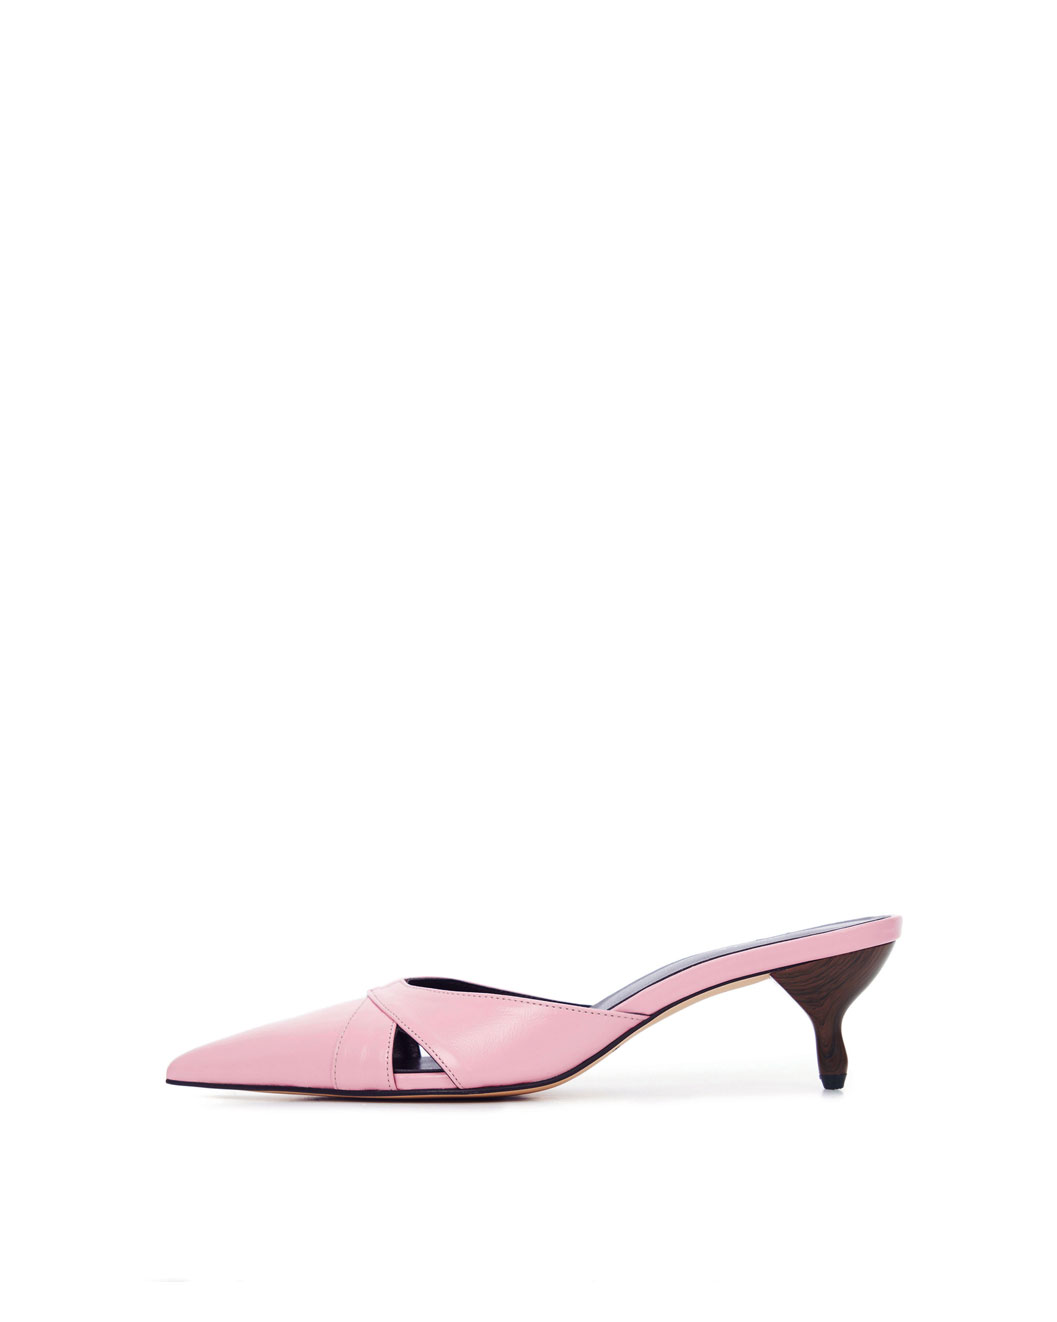 Glam Mules - PINK